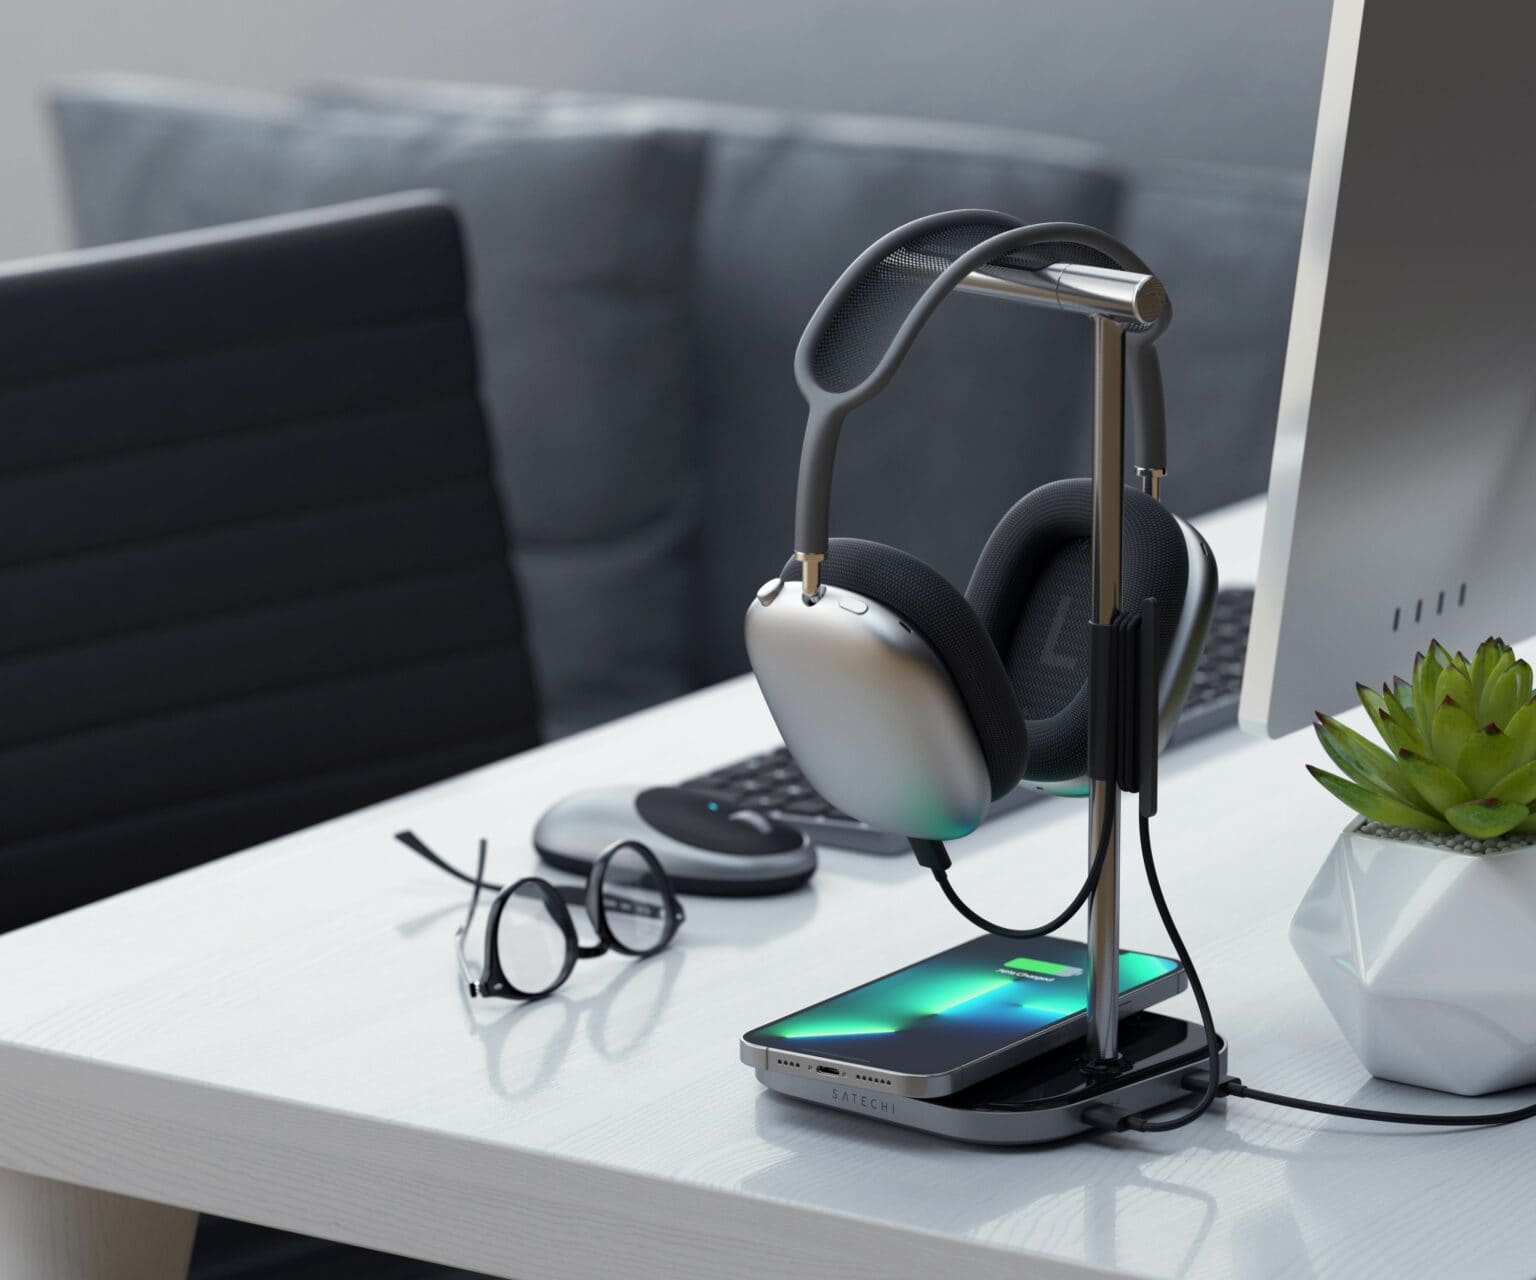 Satechi's new stand holds and charges AirPods Max and other gear -- and it looks good doing it.